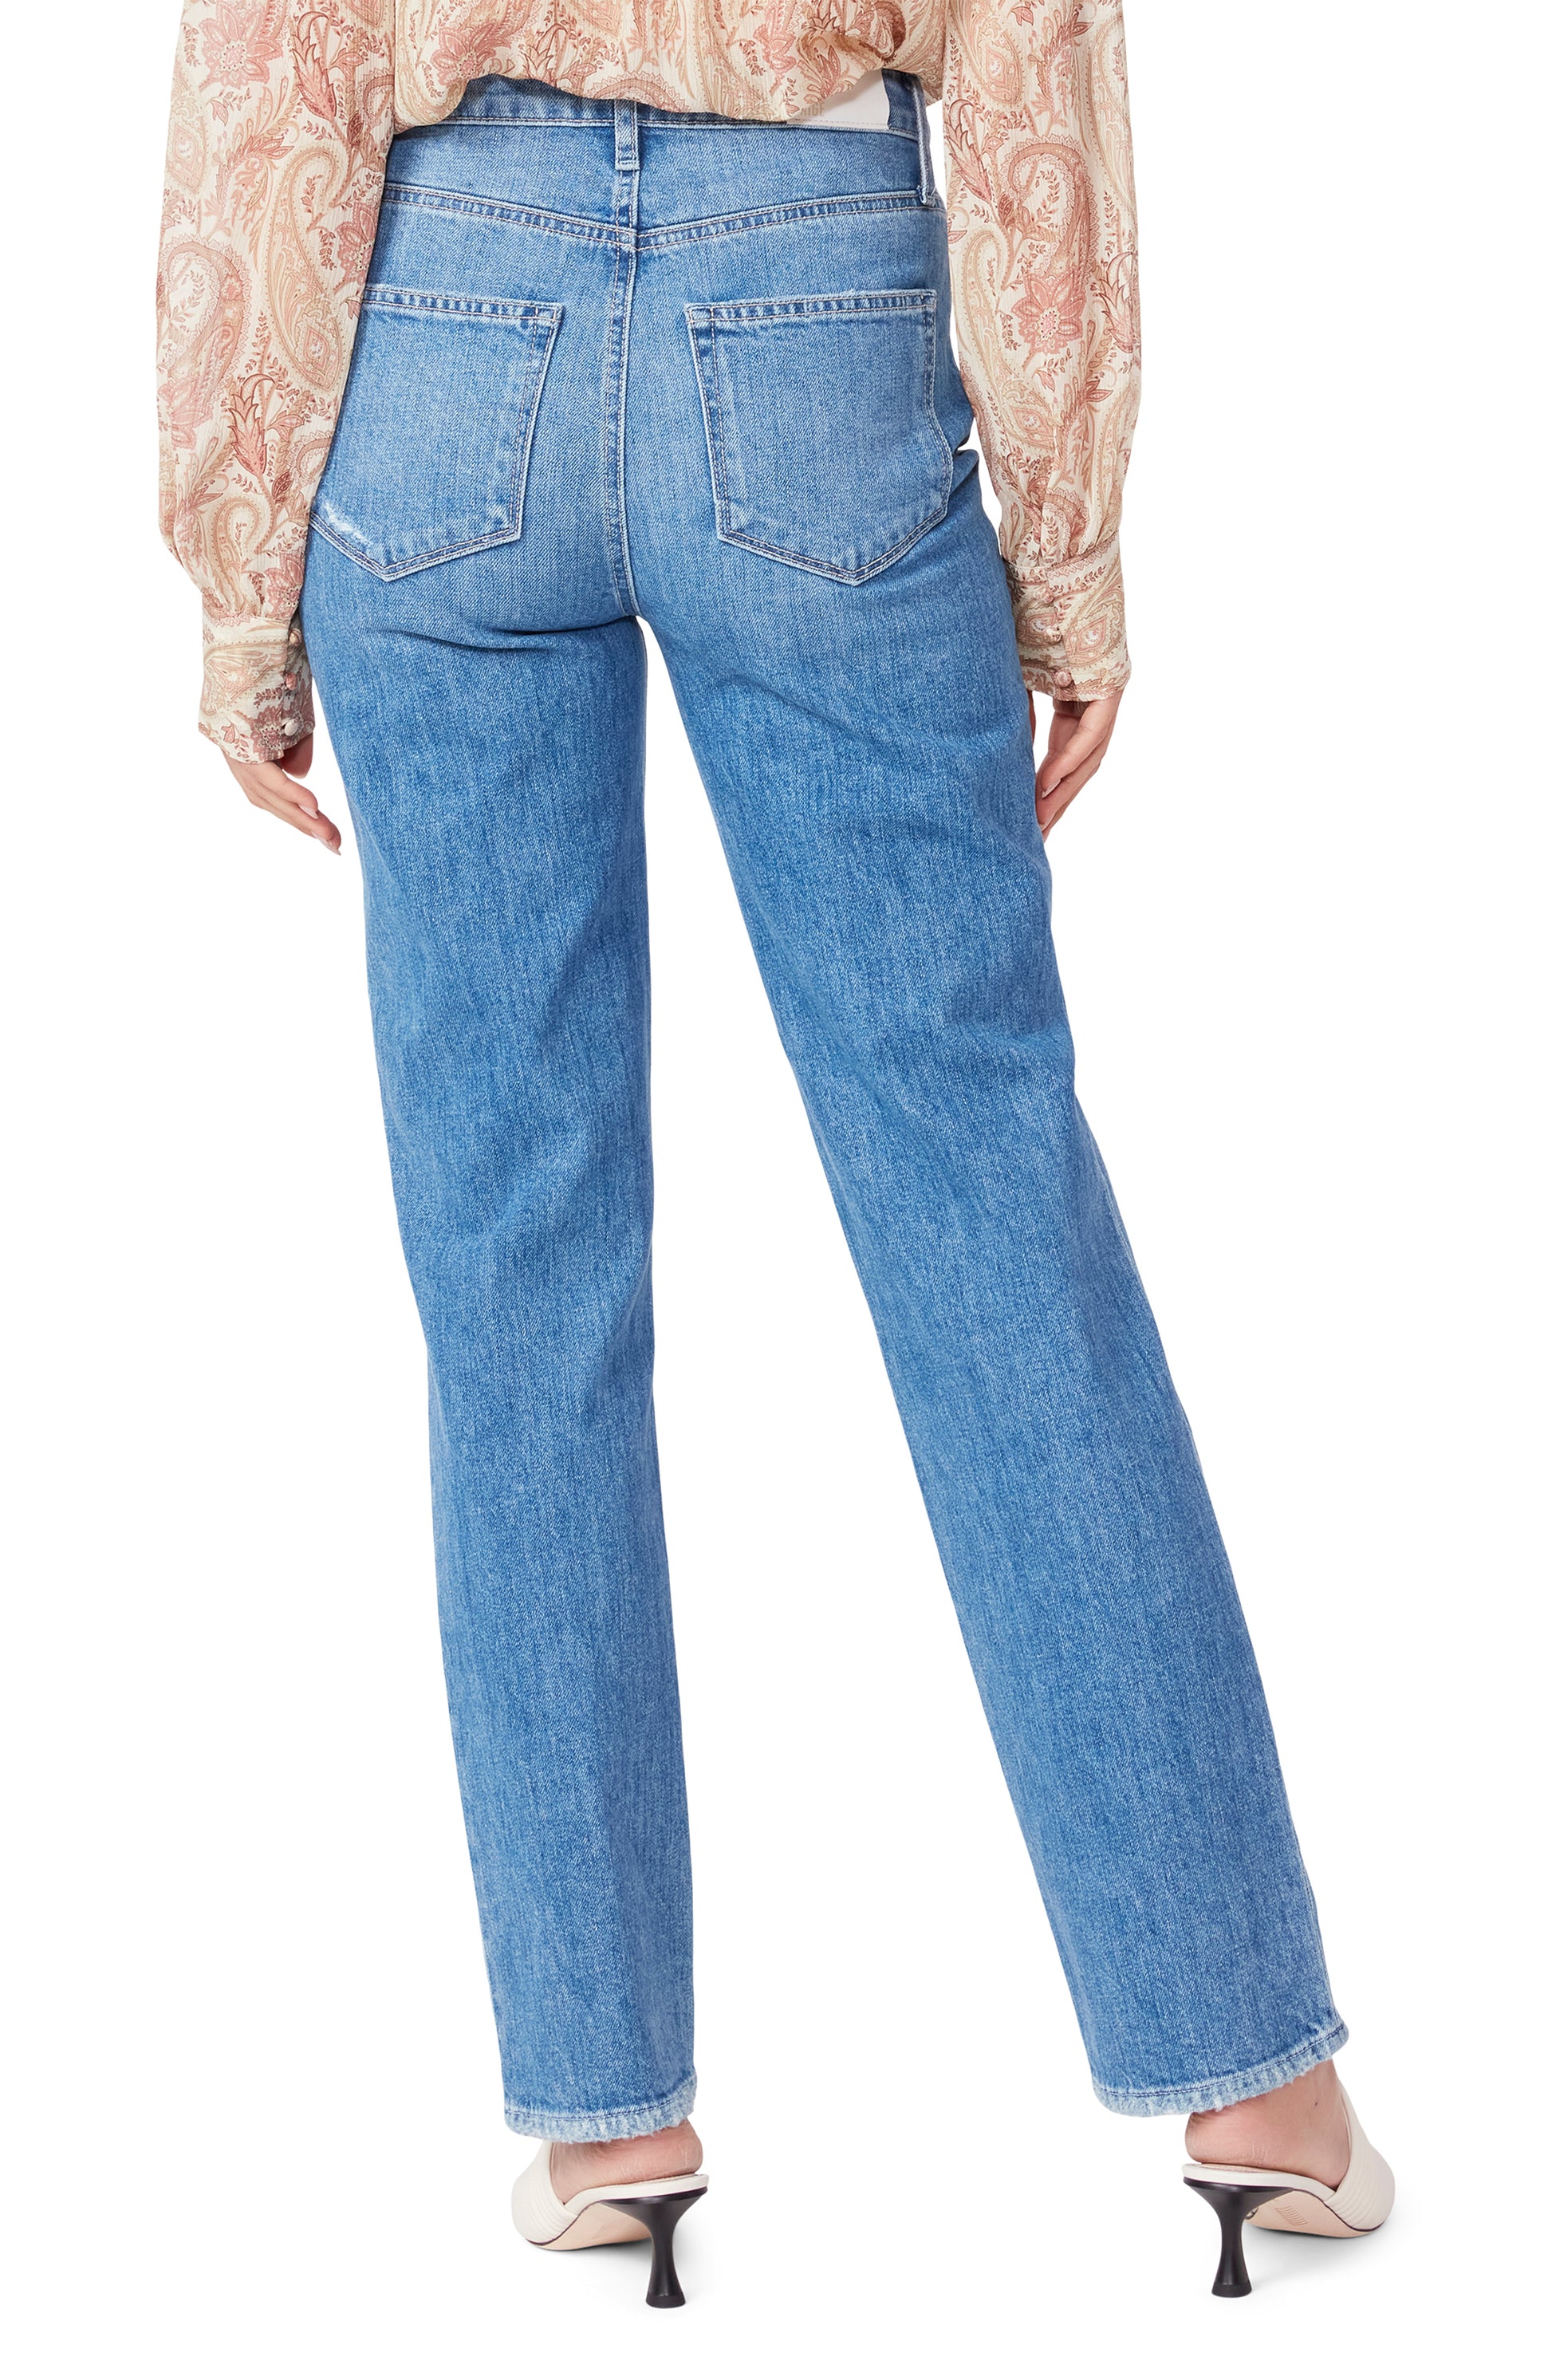 The back view of a woman wearing Paige Sarah Straight 30" - Wannabe Distressed flared jeans.